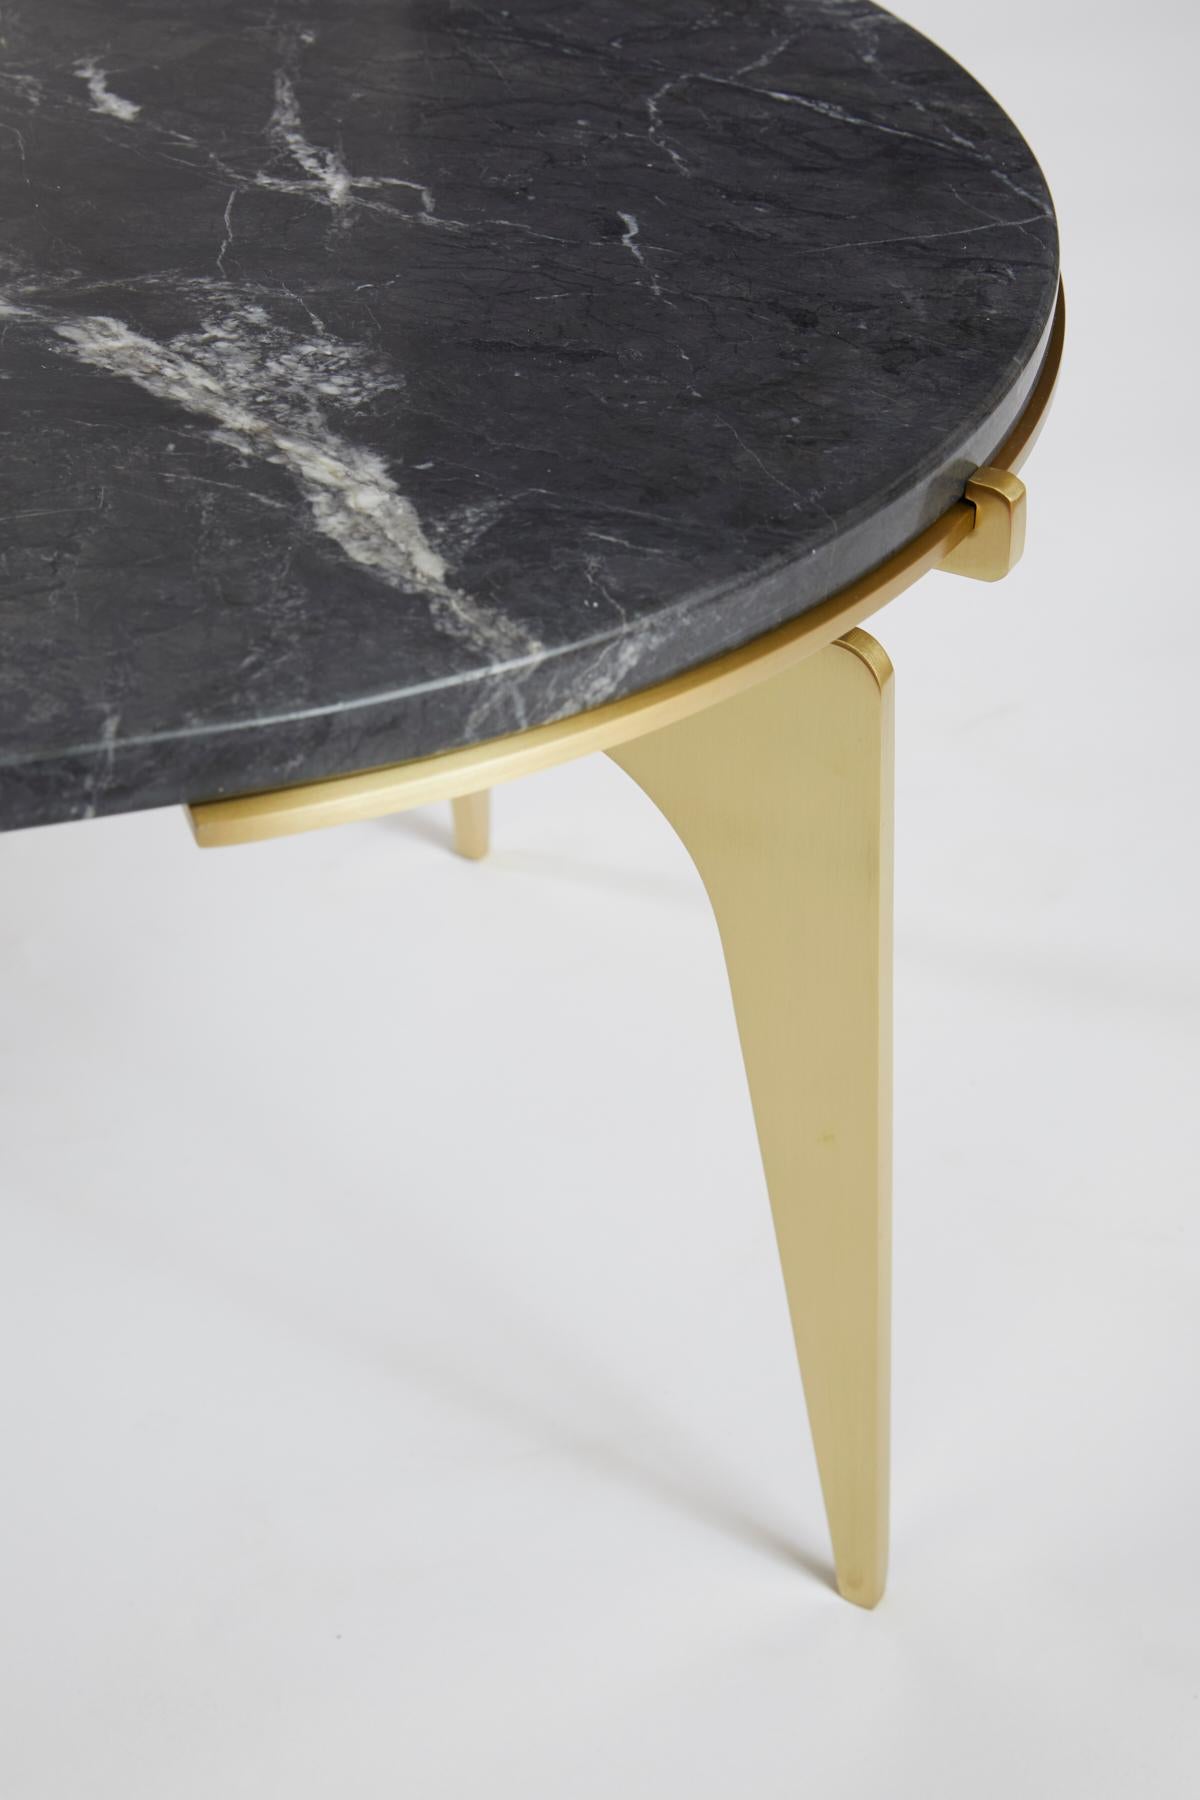 Black (Grigio Carnico - Black Stone) Prong Racetrack Coffee Table in Brass Base with Marble Top by Gabriel Scott 8